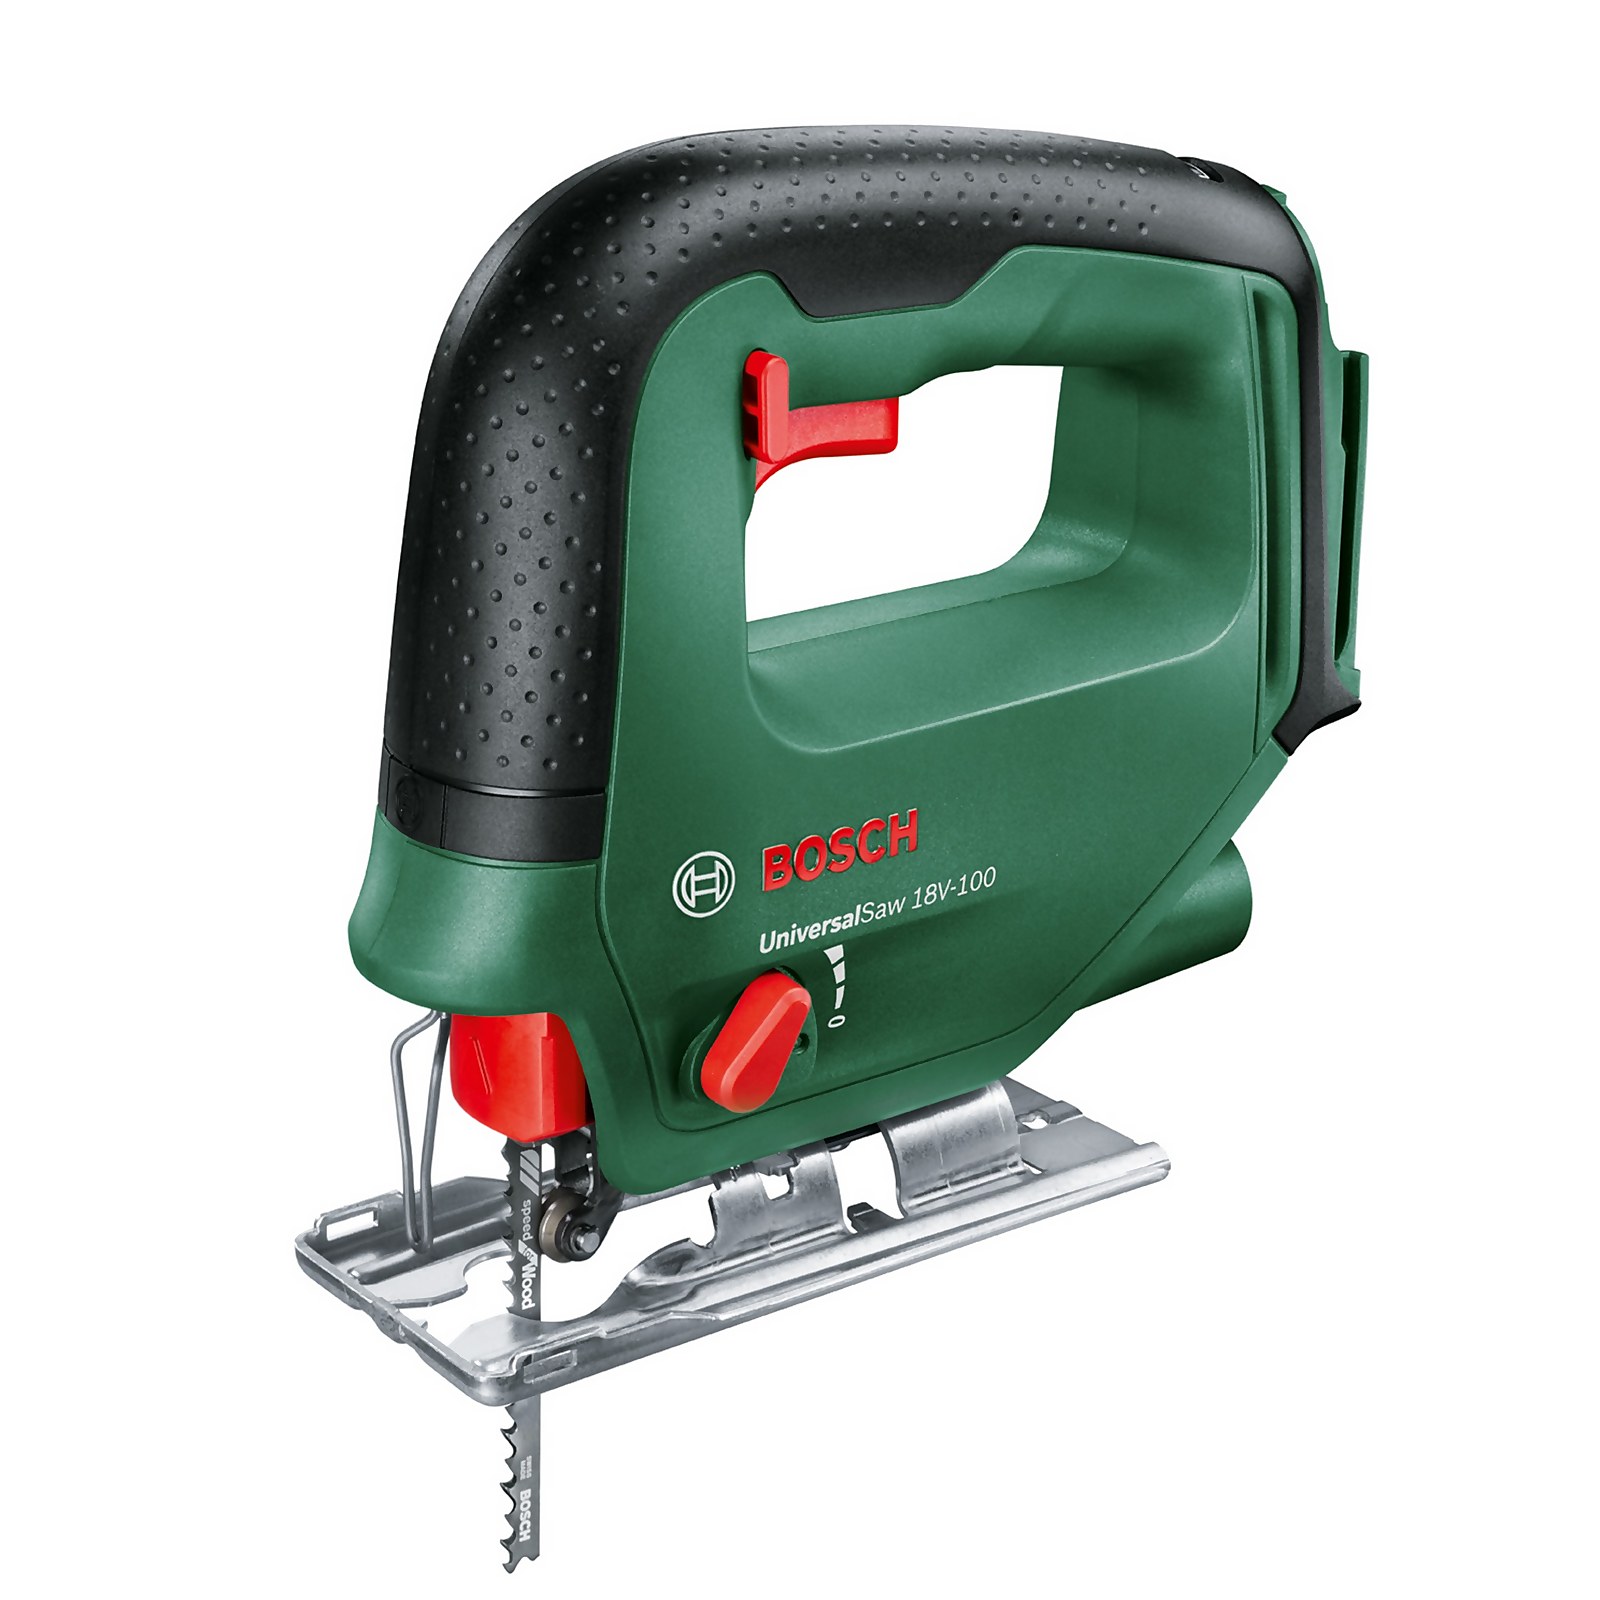 Photo of Bosch Universalsaw 18v-100 Jigsaw -no Battery Included-